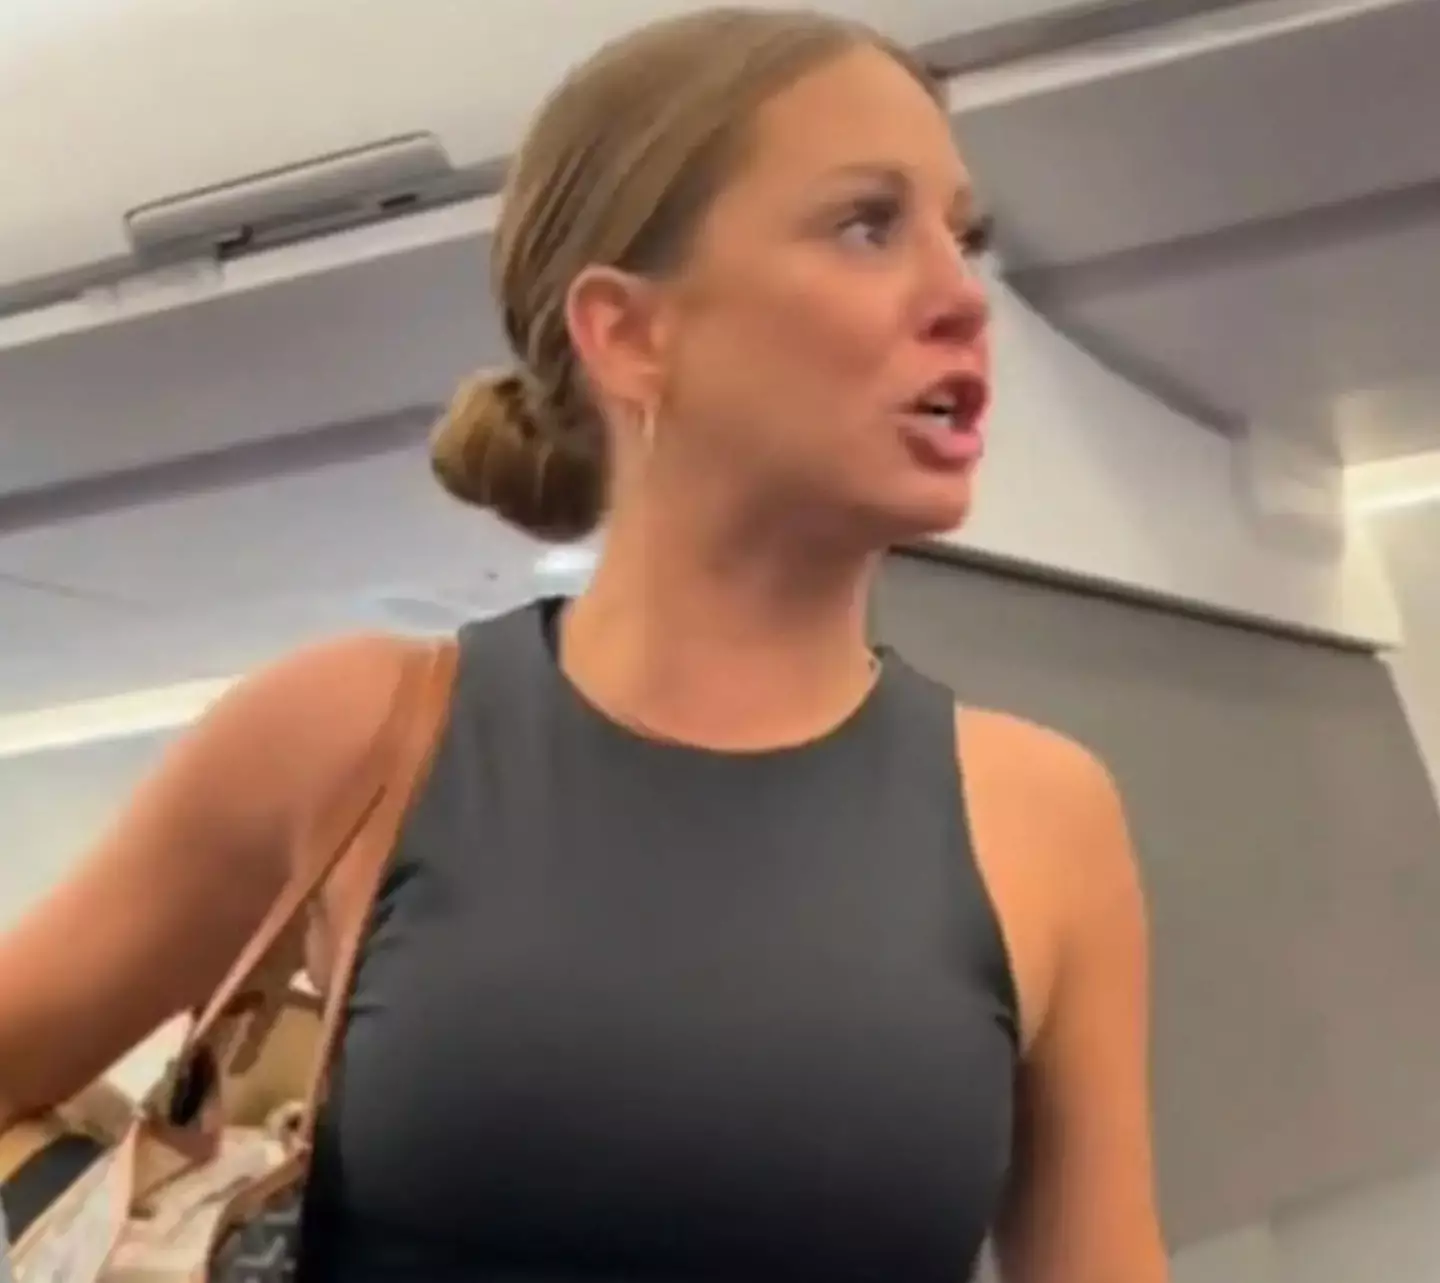 Tiffany Gomas was kicked off the flight following her outburst.